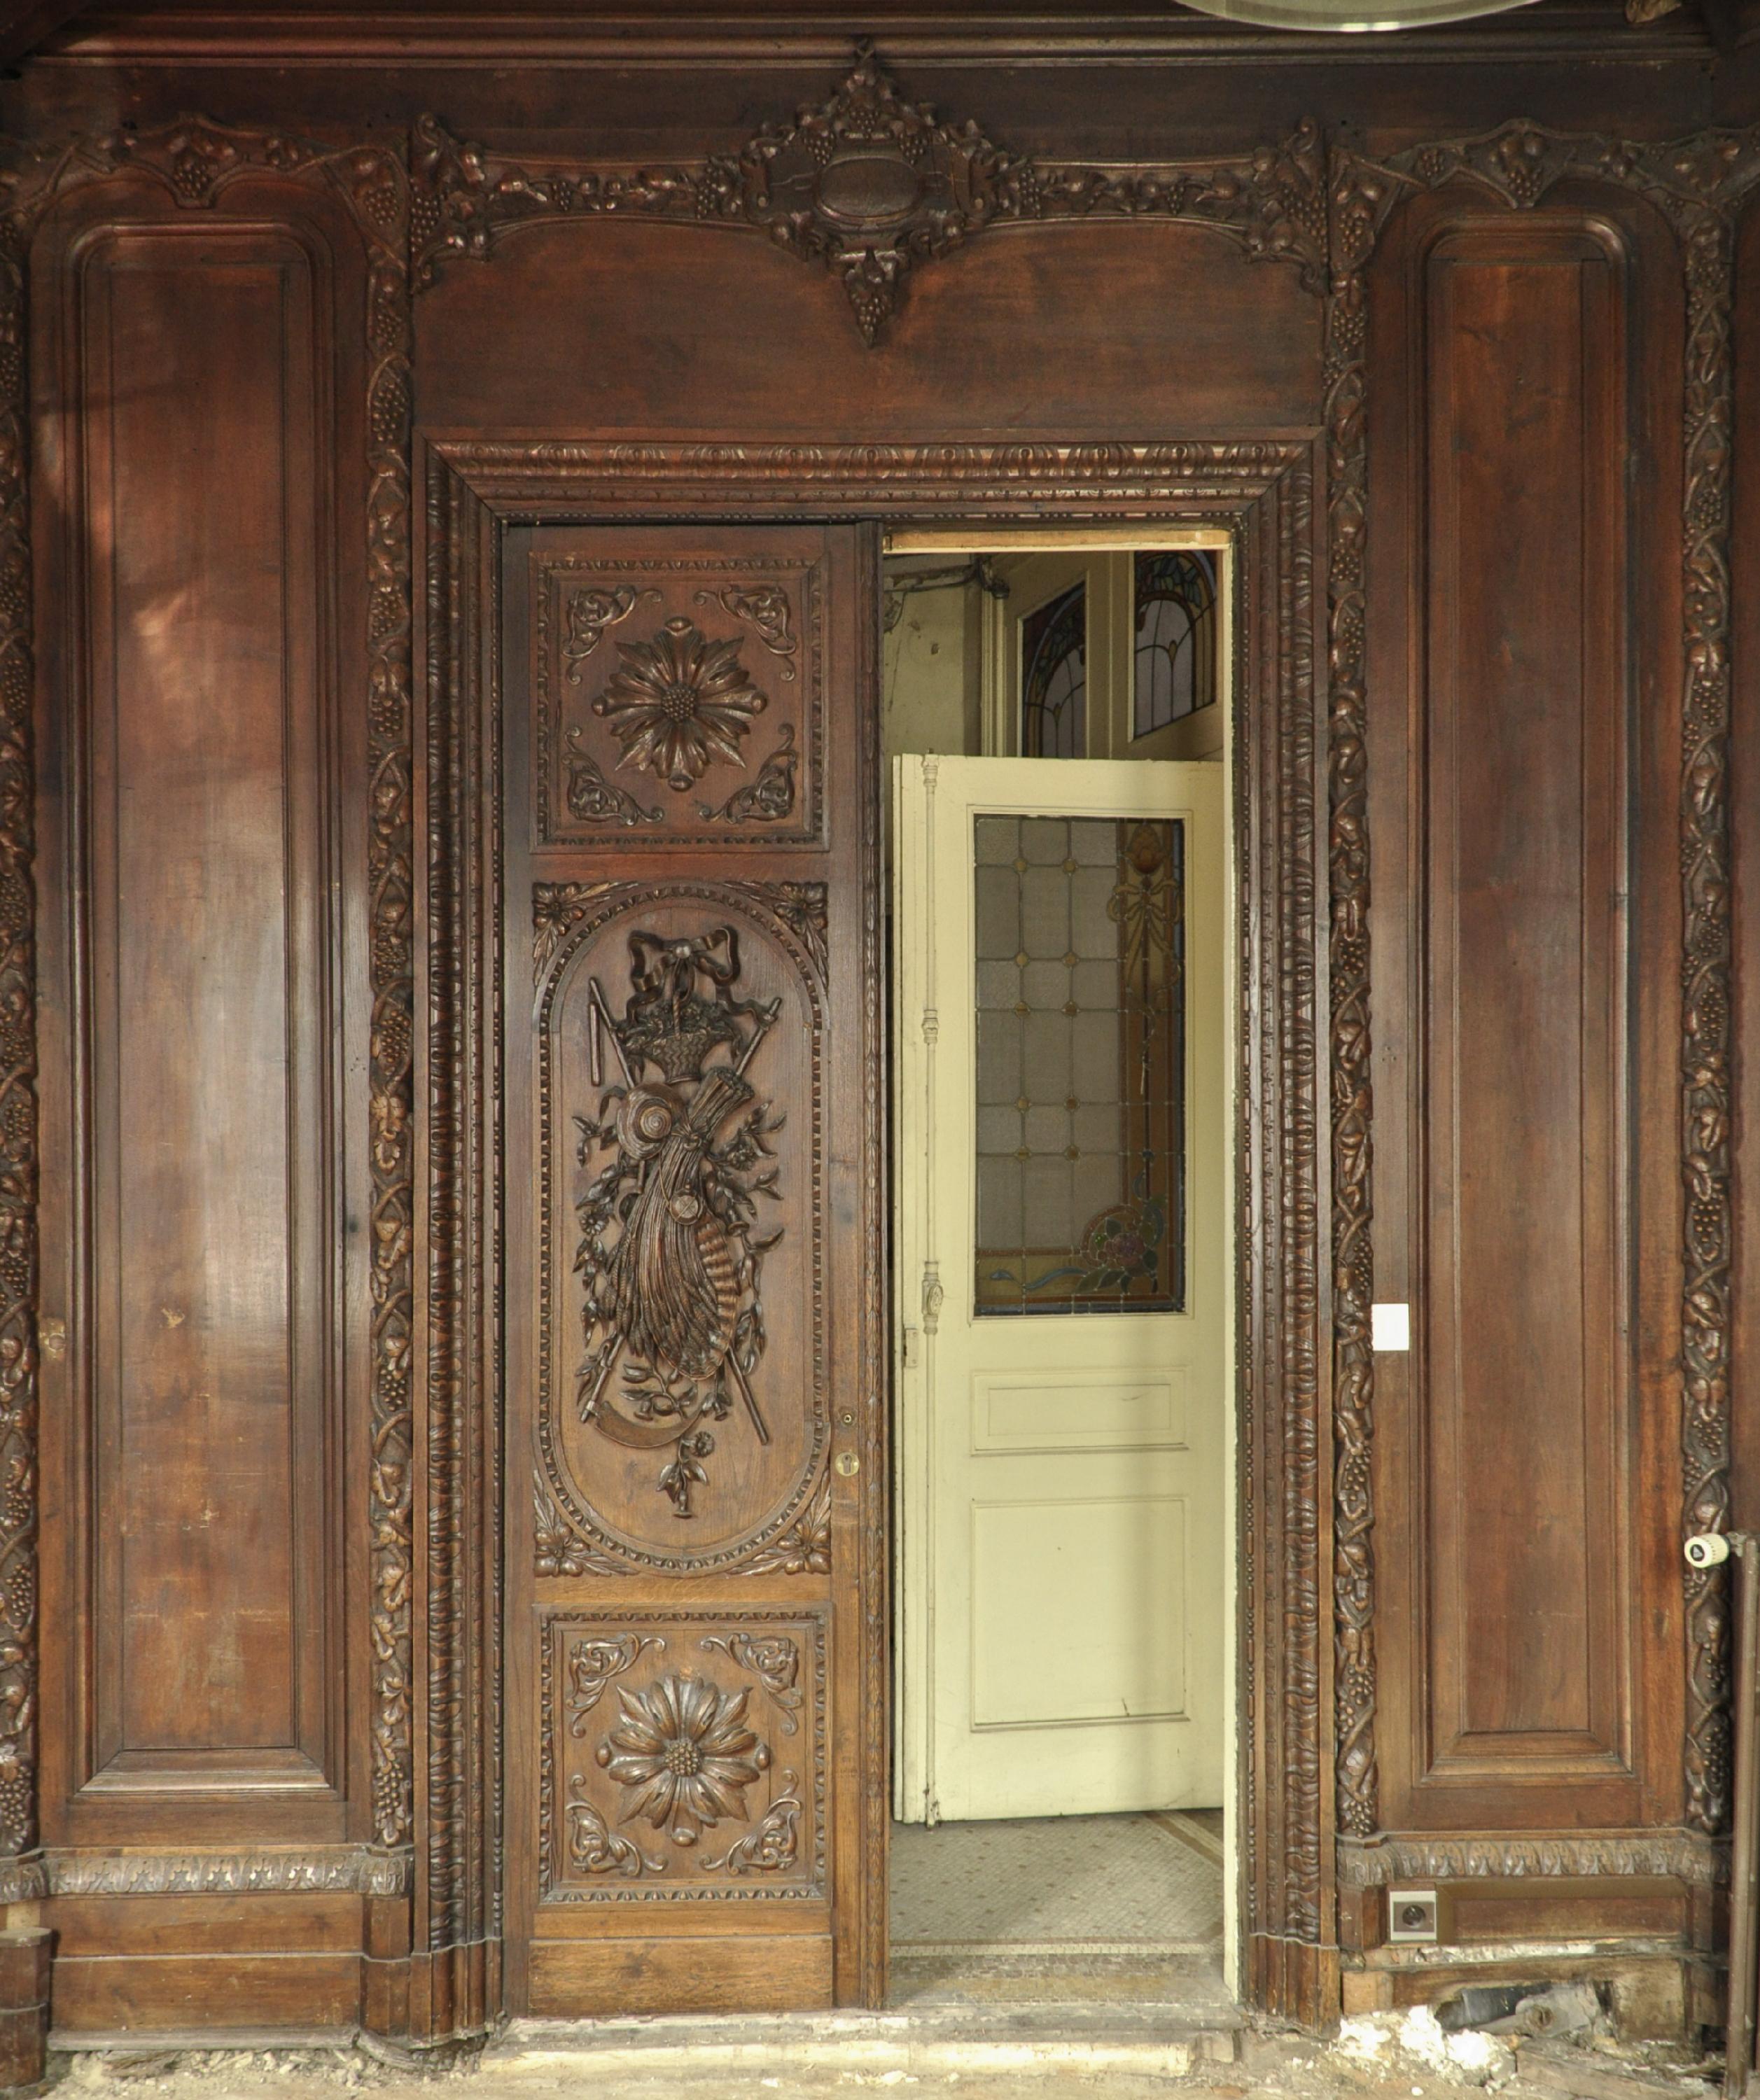 This beautiful carved oak wood paneled room was made in the 19th century.
Designed originally for a hexagonal room, with a boudoir, it is composed of six carved wall panels. Three panels have window openings, two are fitted with doors, and the last